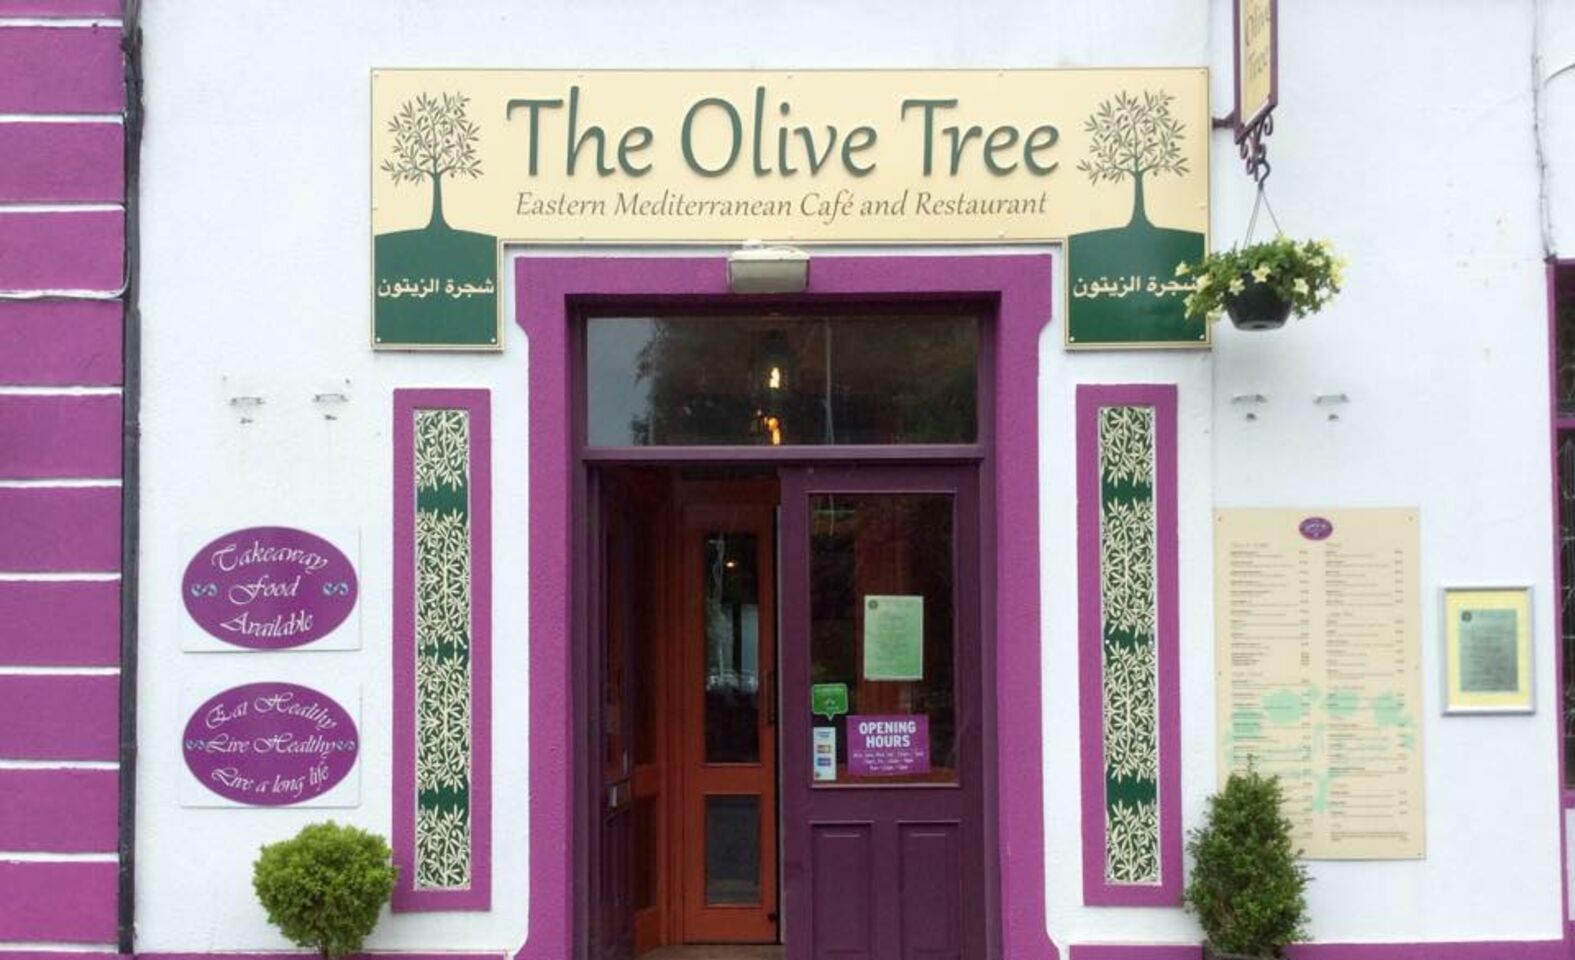 A photo of The Olive Tree